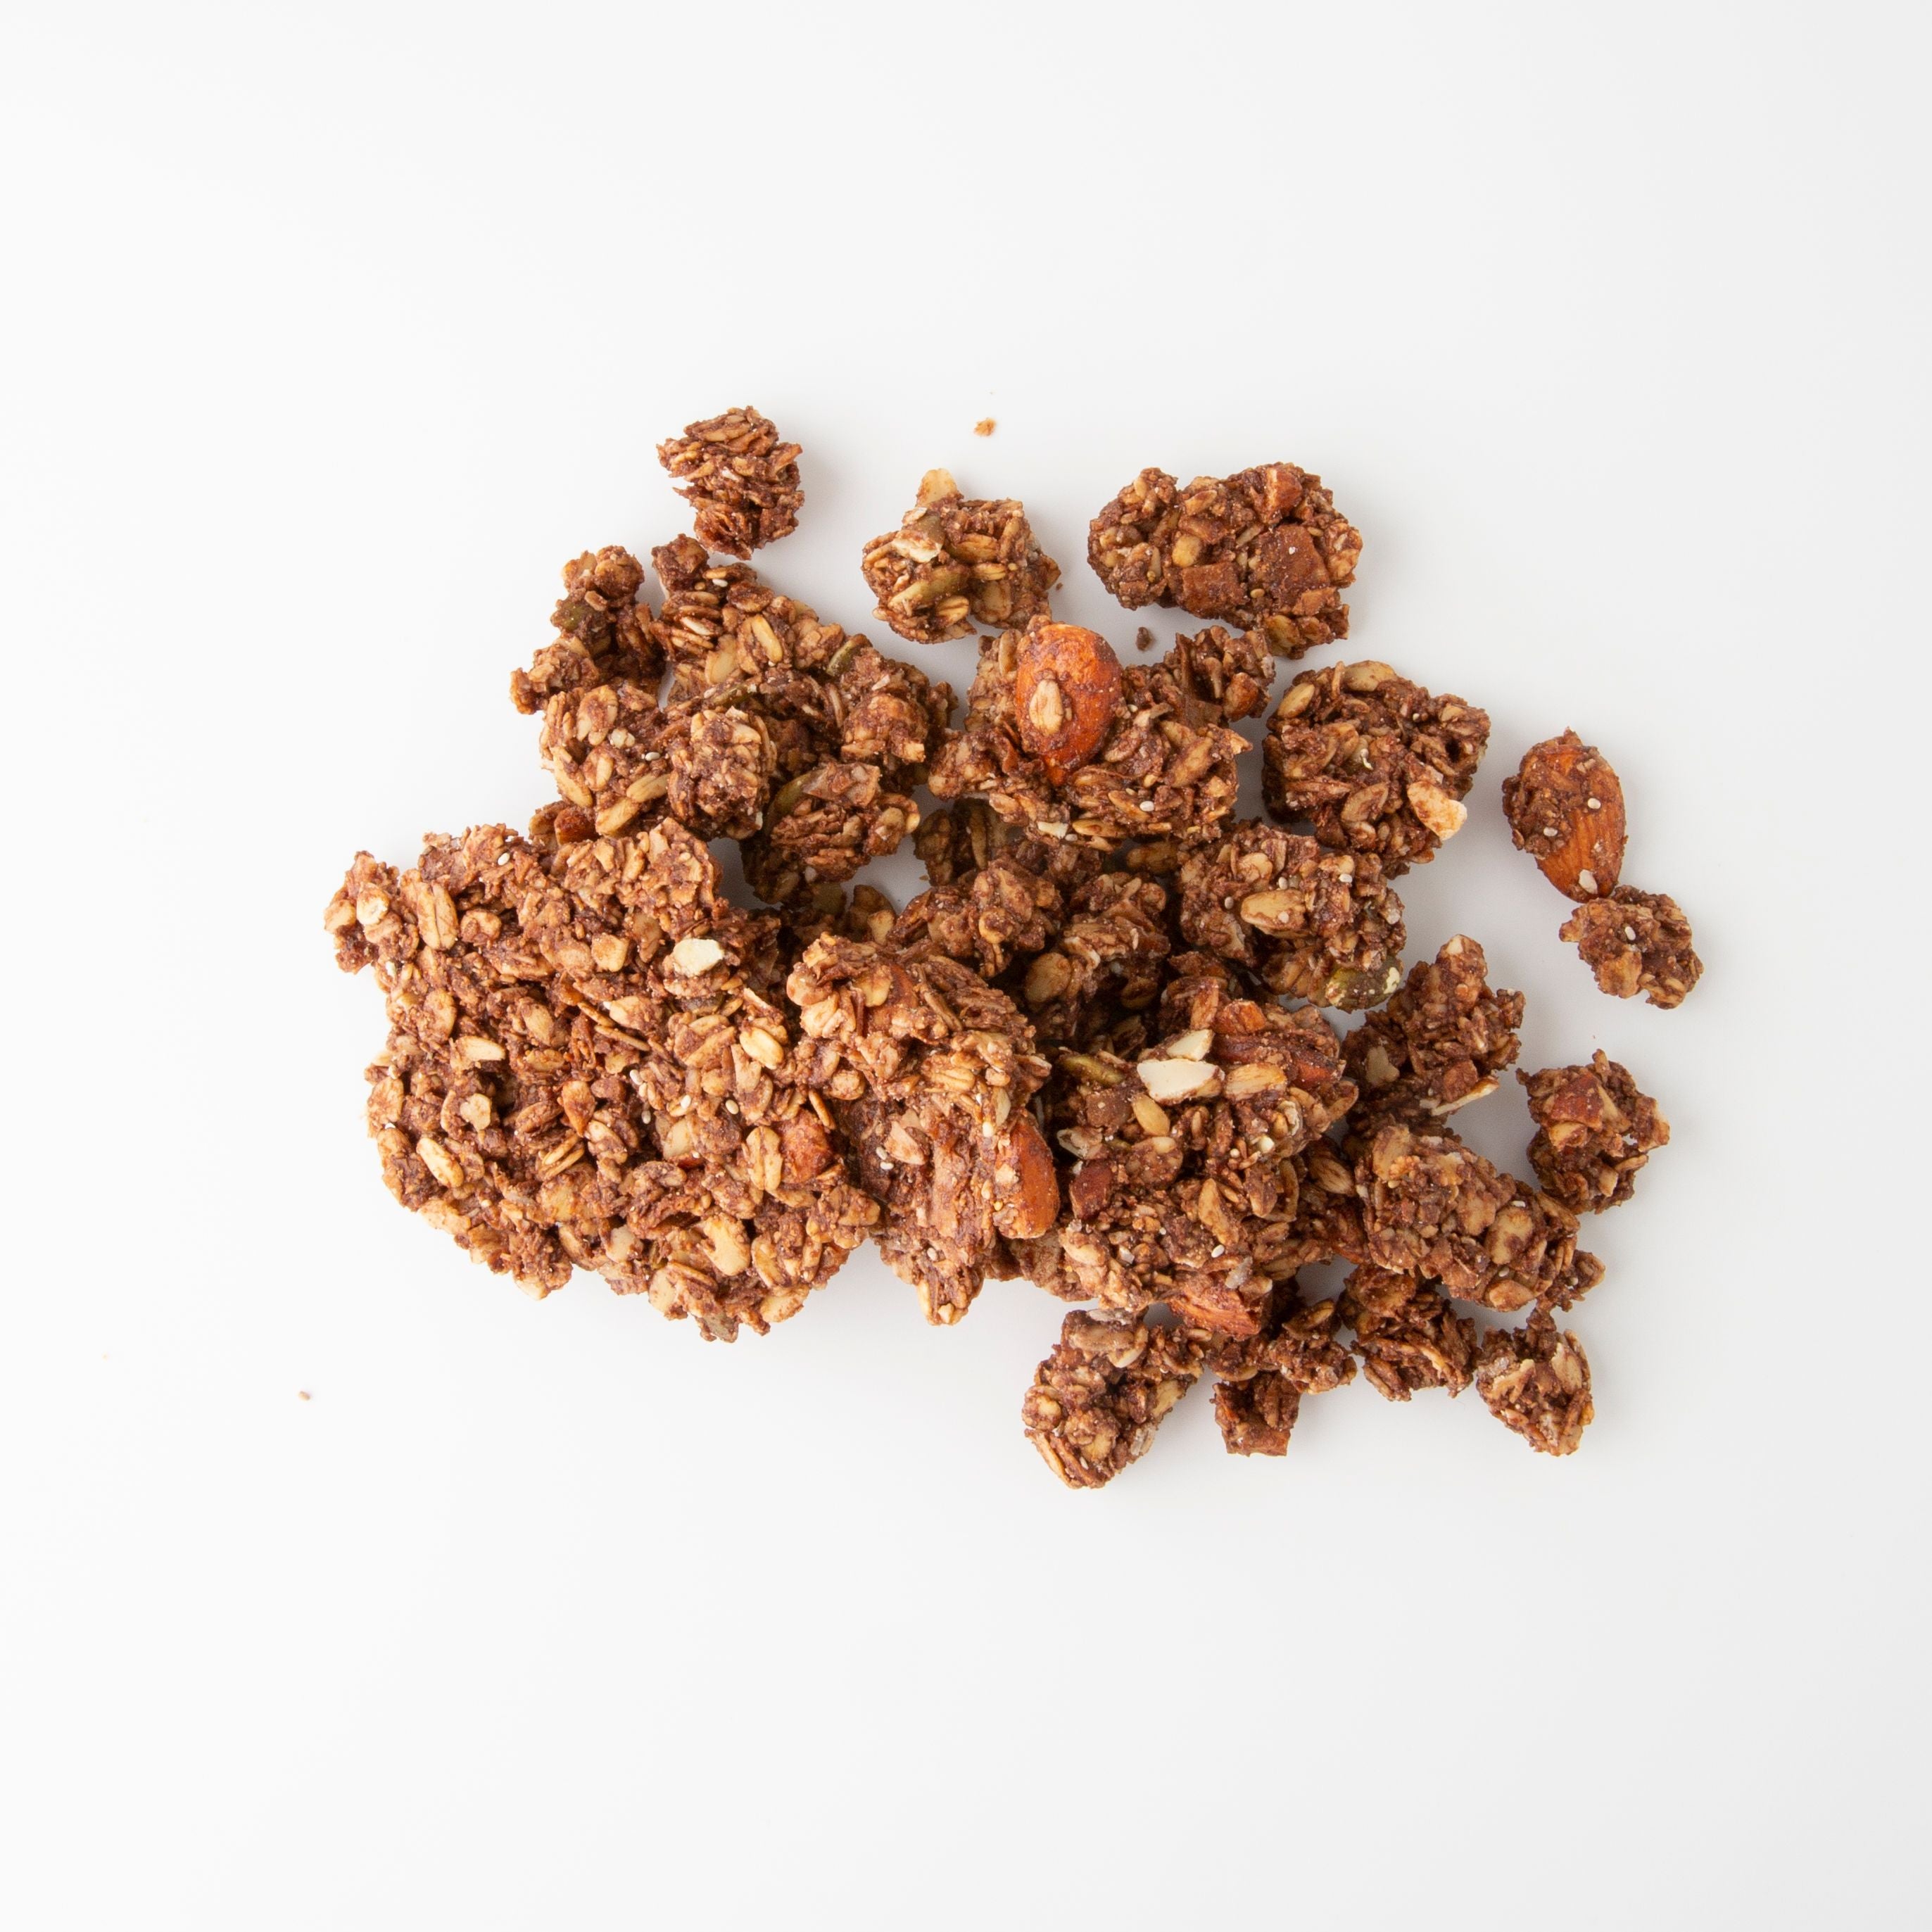 Cocoa and Chia Granola (Cereals) Image 2 - Naked Foods